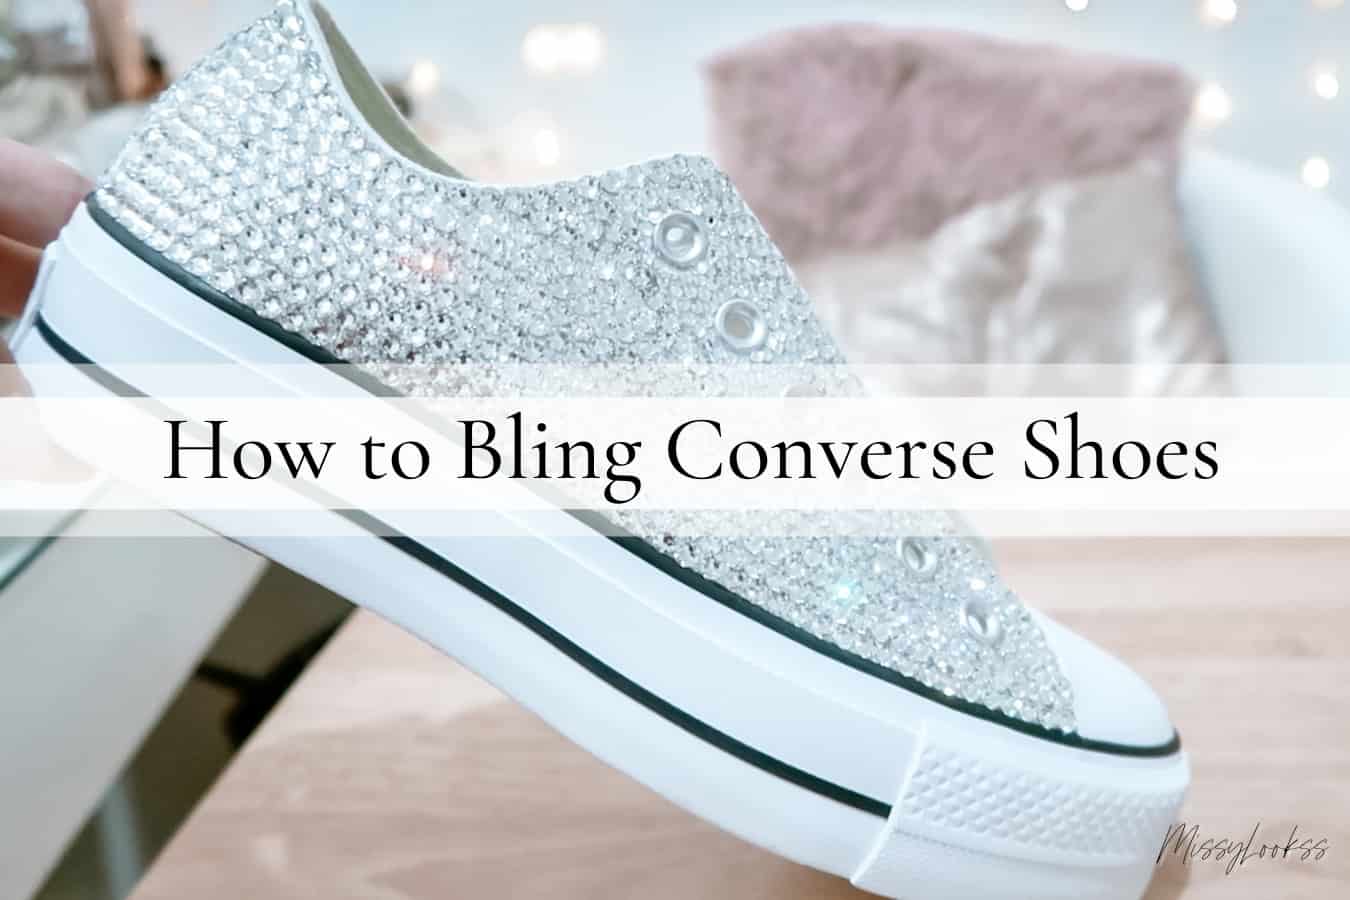 How to bling out converse sneakers